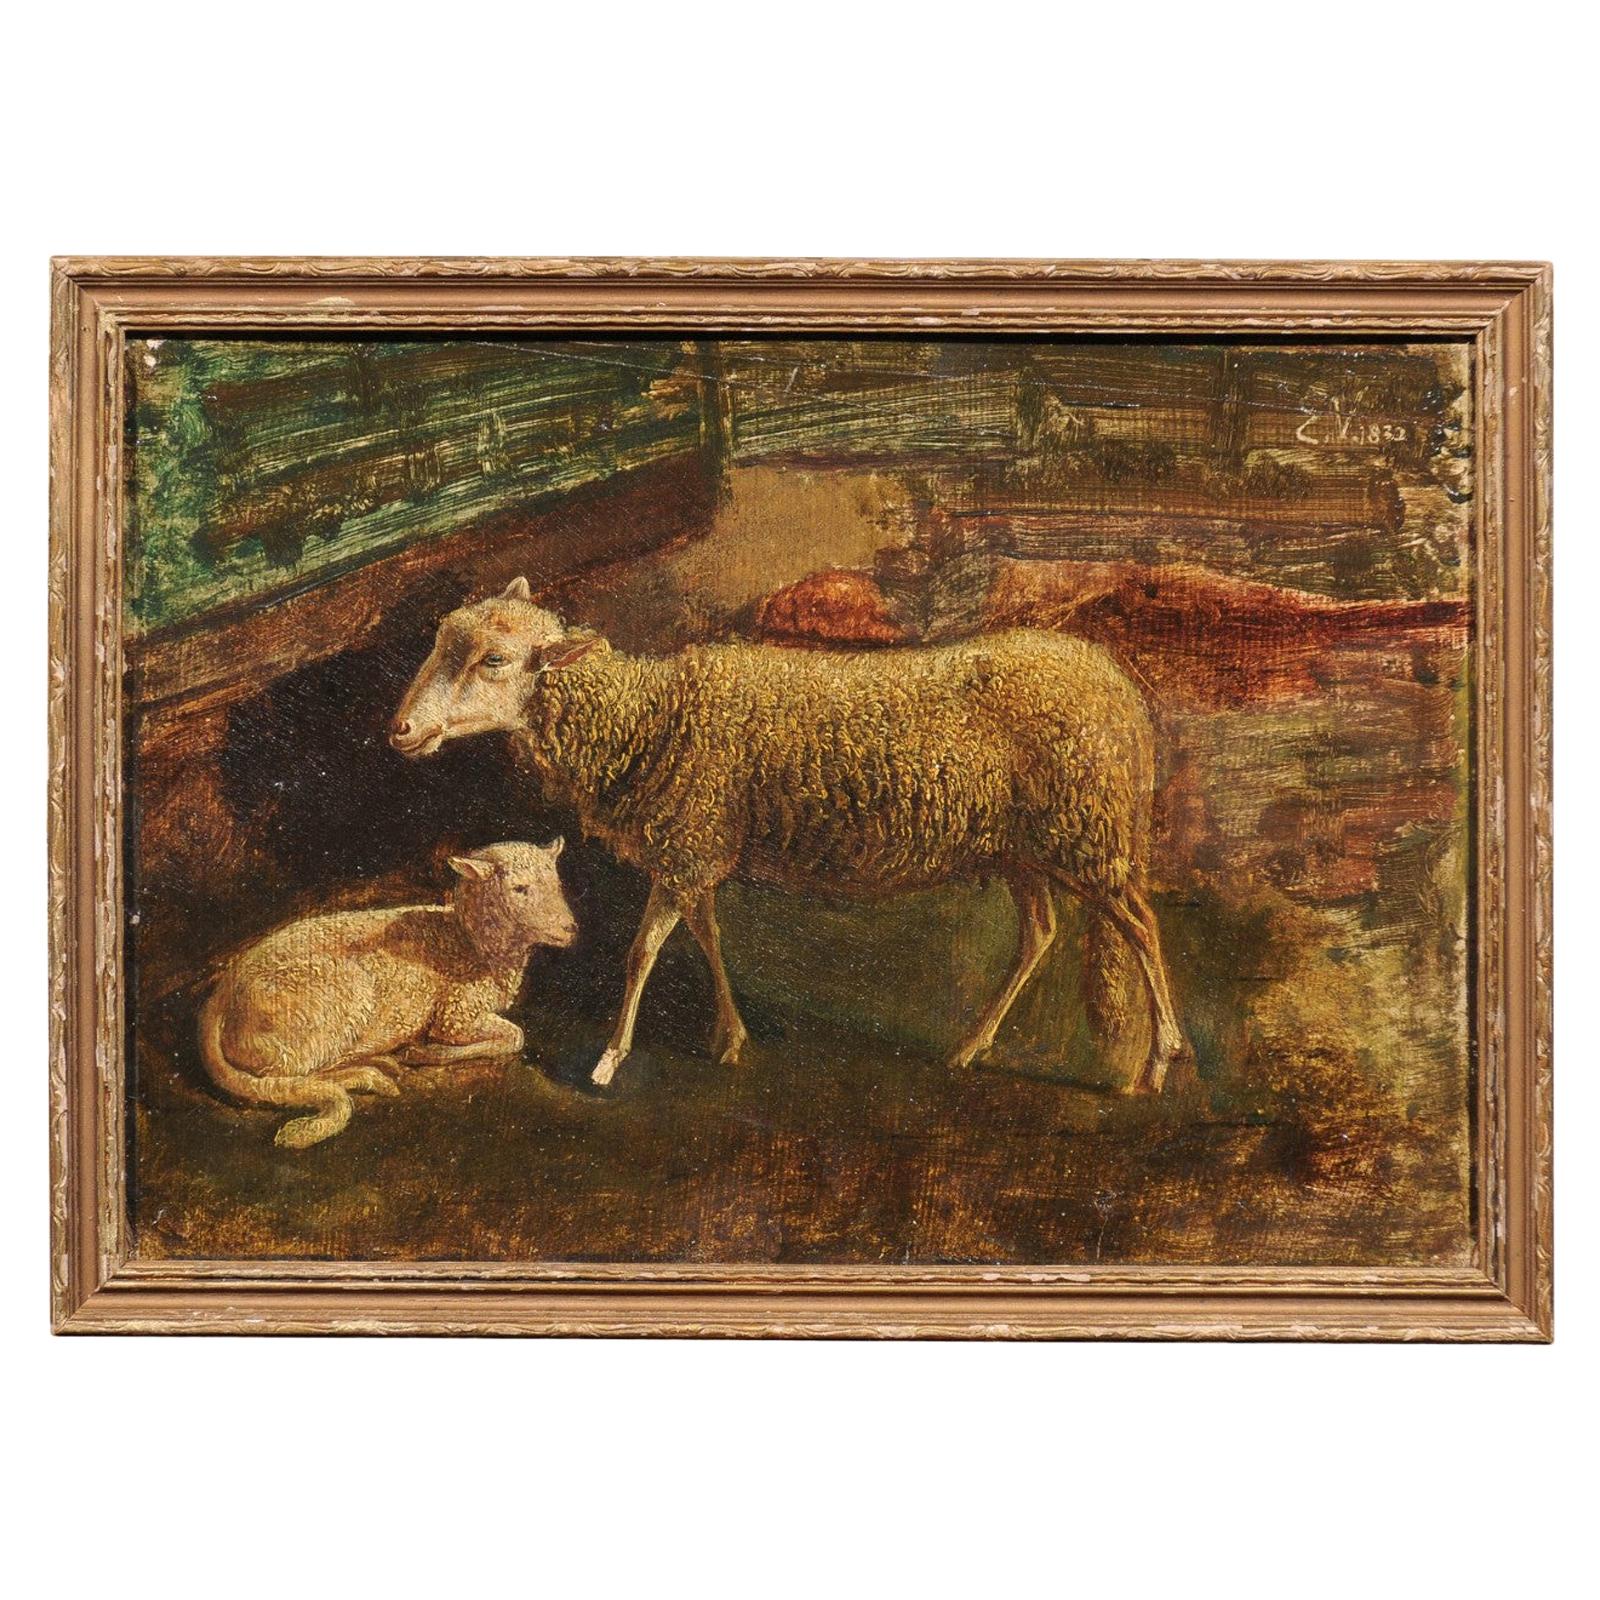 Italian Framed Oil on Panel of a Sheep and Her Lamp, Signed, "EV, 1830"